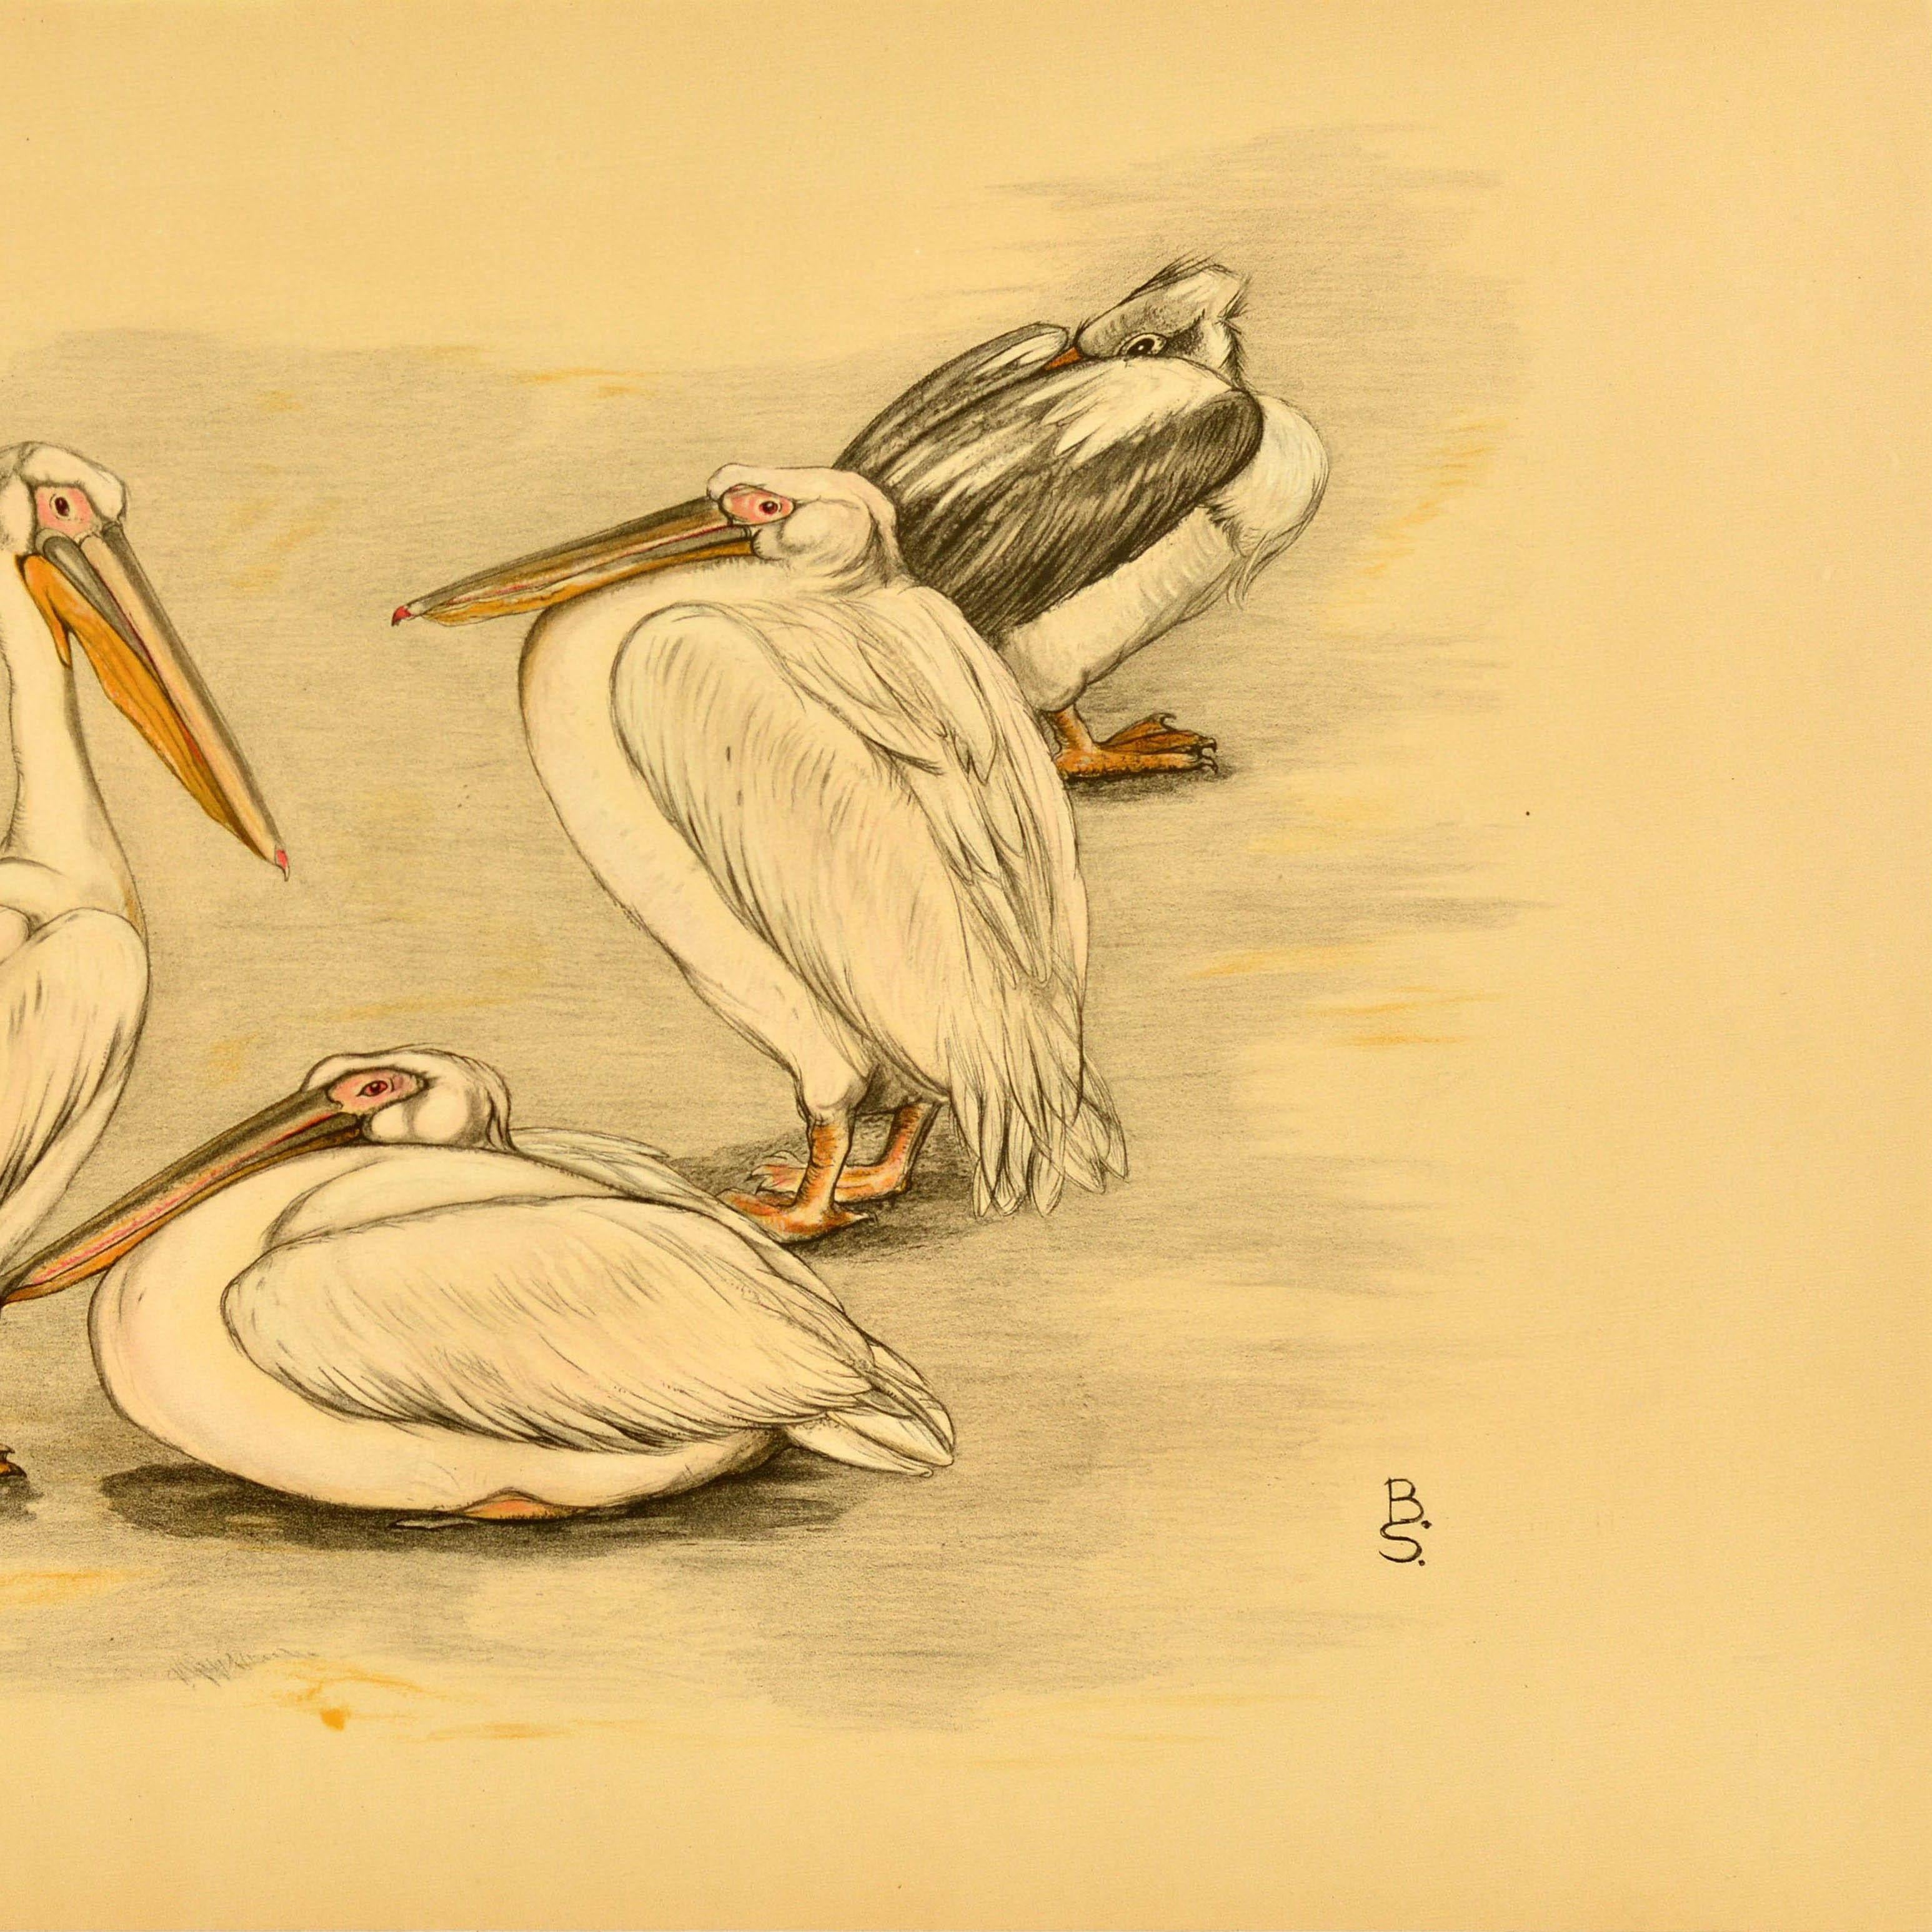 Original vintage animal poster featuring an illustration of four pelicans by the Dutch artist and animal painter Berend Sluyterman showing one of the birds sitting and the others standing in different poses. Horizontal. Good condition, minor